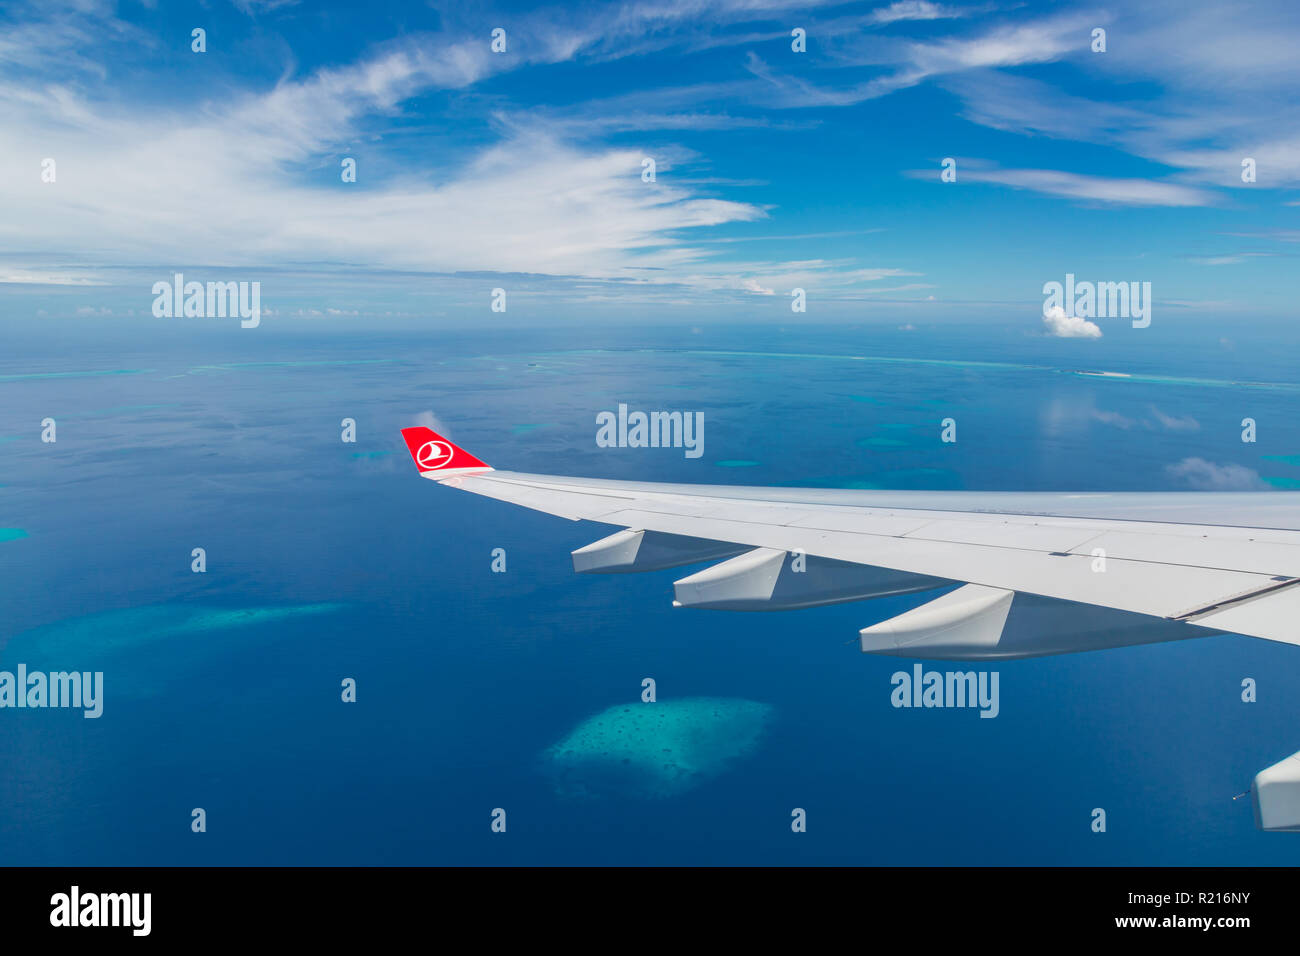 10.12.2016 - Maldives, Male: Turkish Airlines Being 777 landing in Maldives capital city and airport, blue sea and island view from plane Stock Photo